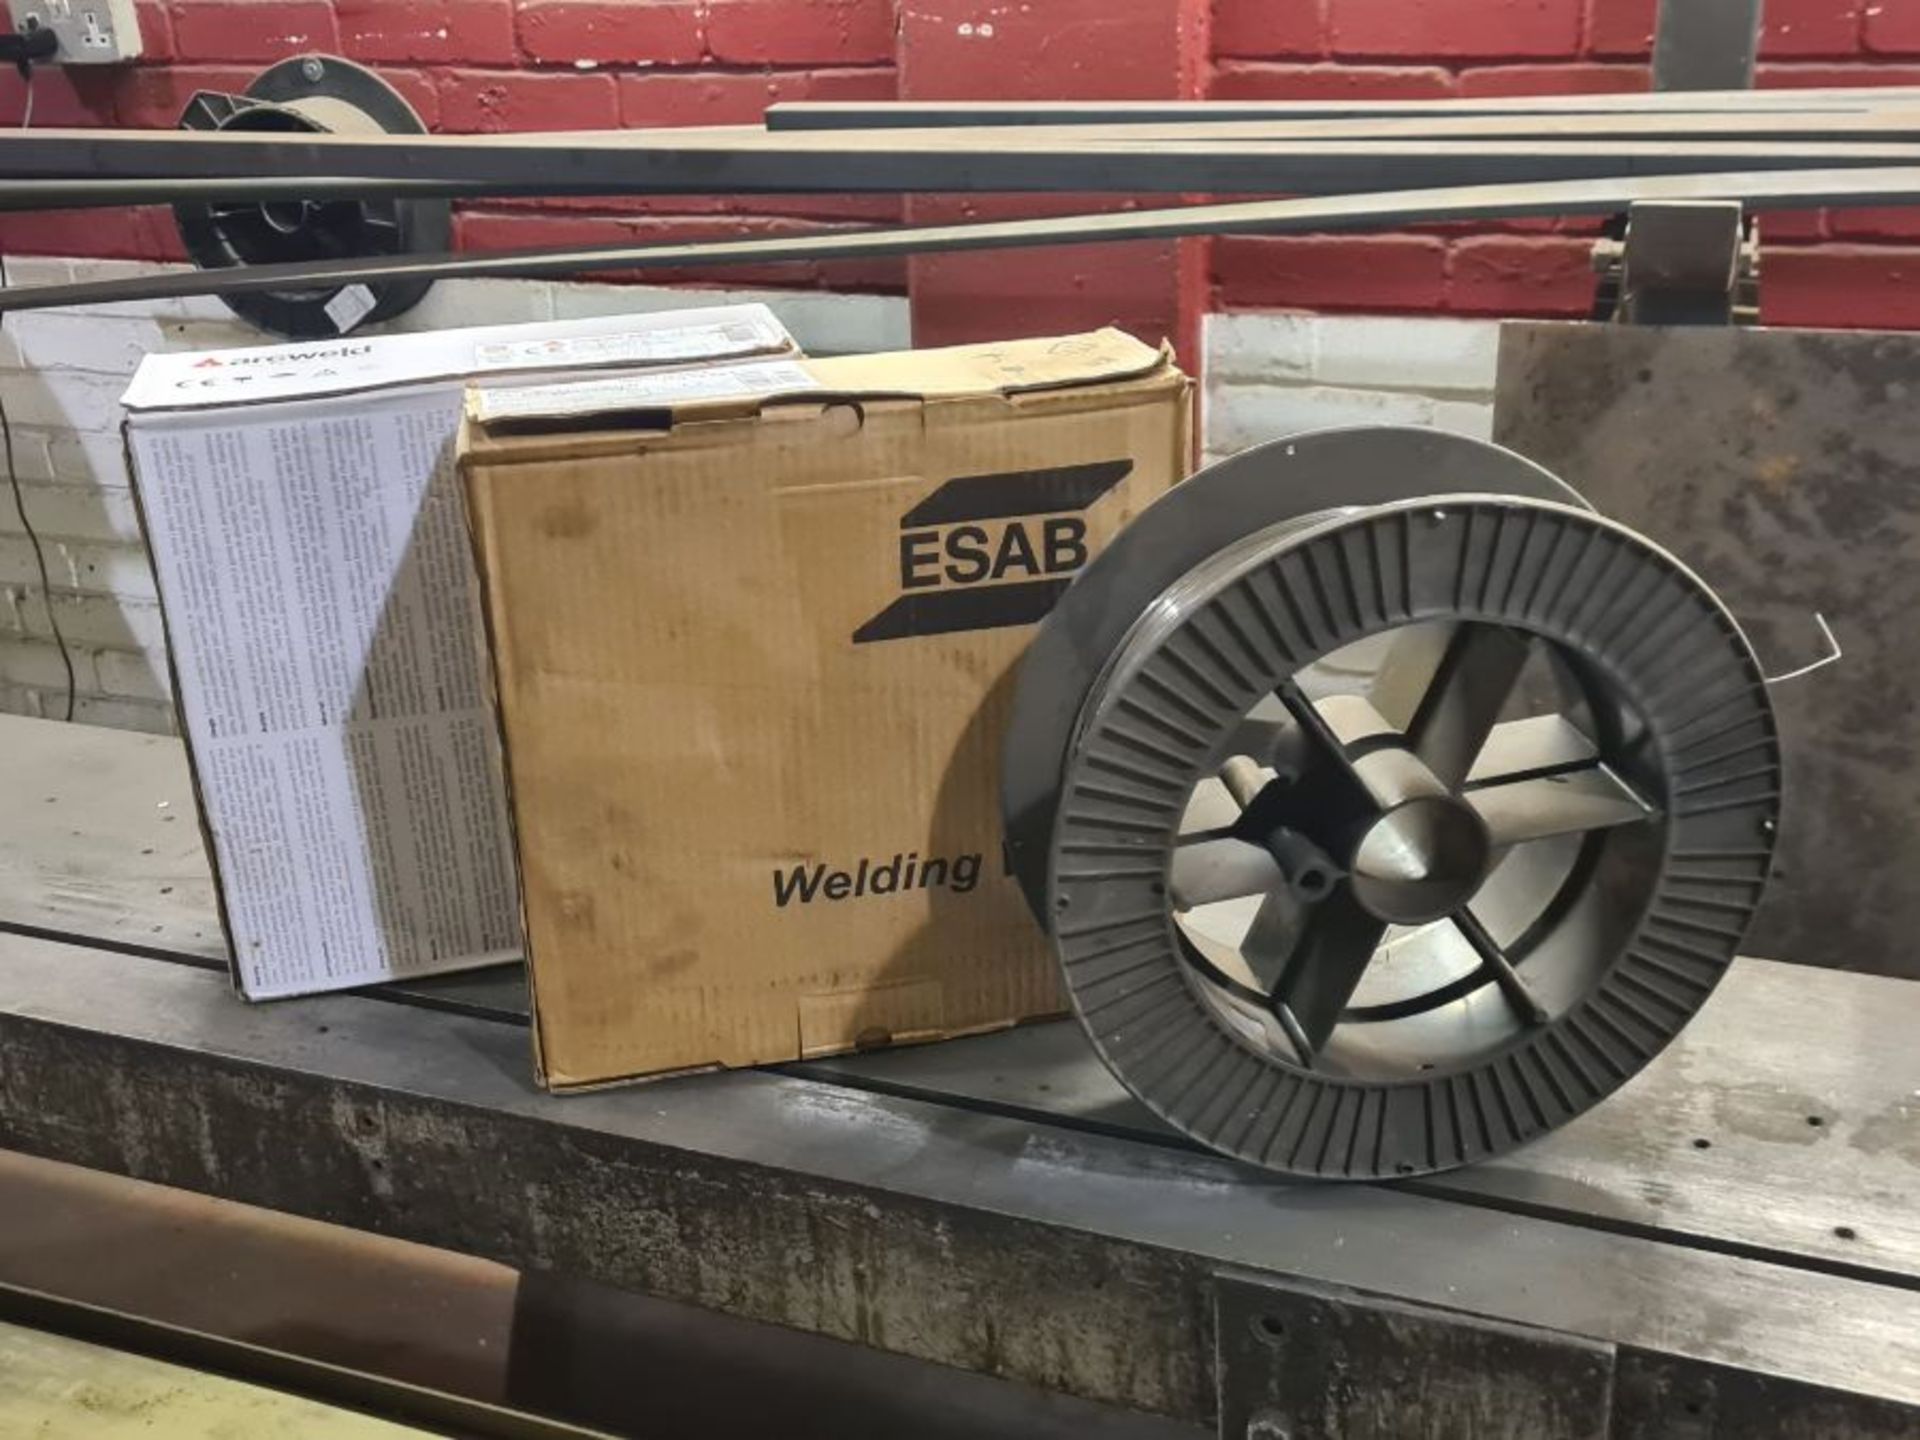 2 boxes unused welding wire Arcweld 2S2 and ESAB weld G3SI1 and part used roll 1mm wire.